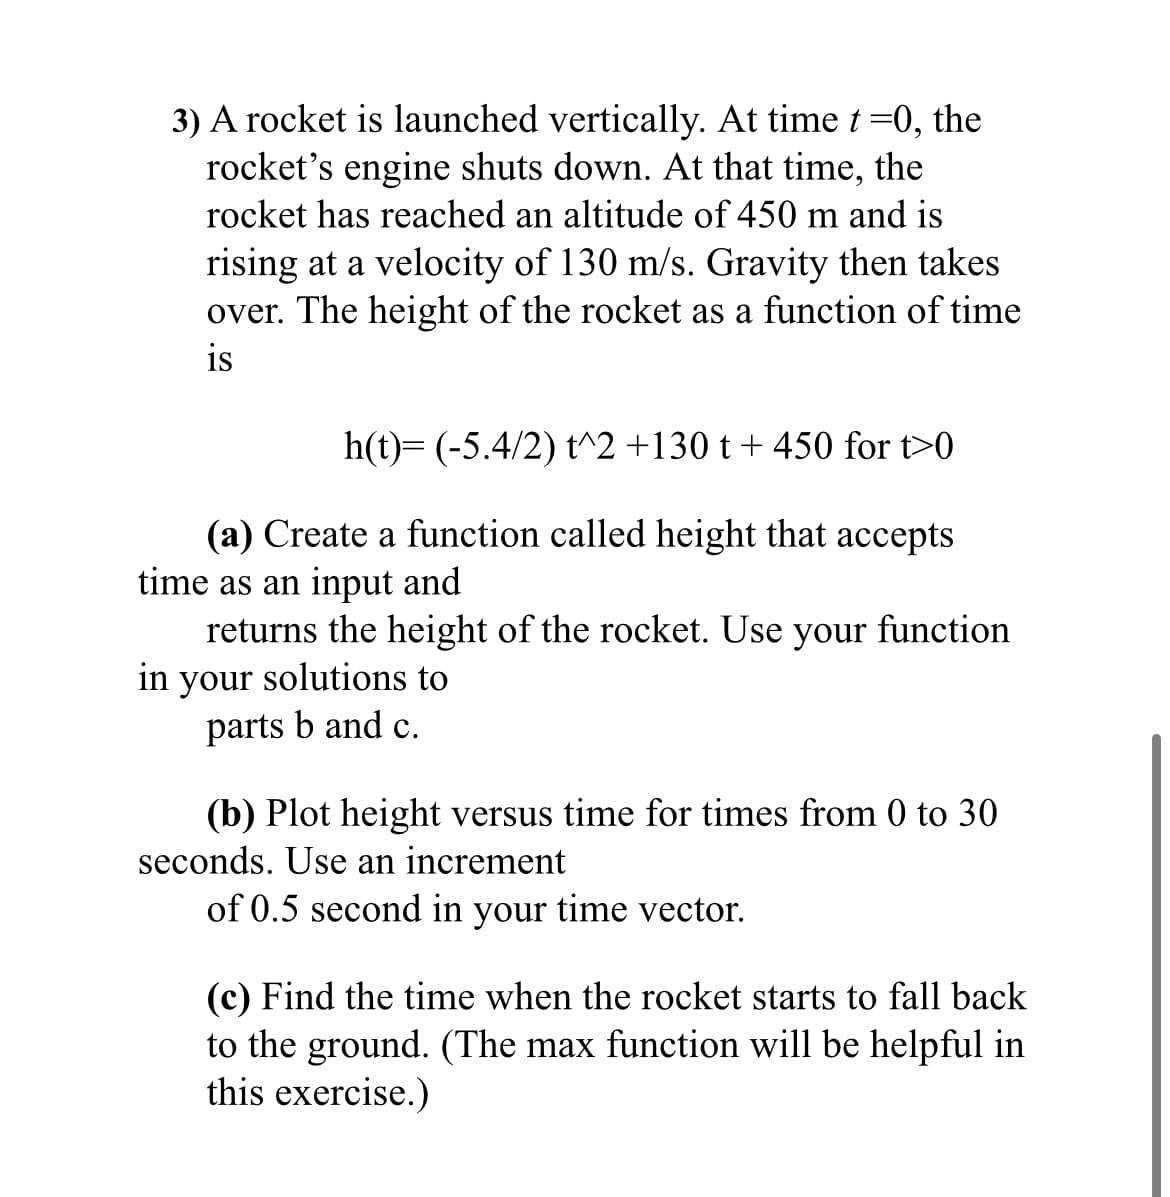 3) A rocket is launched vertically. At time t=0, the
rocket's engine shuts down. At that time, the
rocket has reached an altitude of 450 m and is
rising at a velocity of 130 m/s. Gravity then takes
over. The height of the rocket as a function of time
is
h(t)= (-5.4/2) t^2 +130 t + 450 for t>0
(a) Create a function called height that accepts
time as an input and
returns the height of the rocket. Use your function
in your solutions to
parts b and c.
(b) Plot height versus time for times from 0 to 30
seconds. Use an increment
of 0.5 second in your time vector.
(c) Find the time when the rocket starts to fall back
to the ground. (The max function will be helpful in
this exercise.)